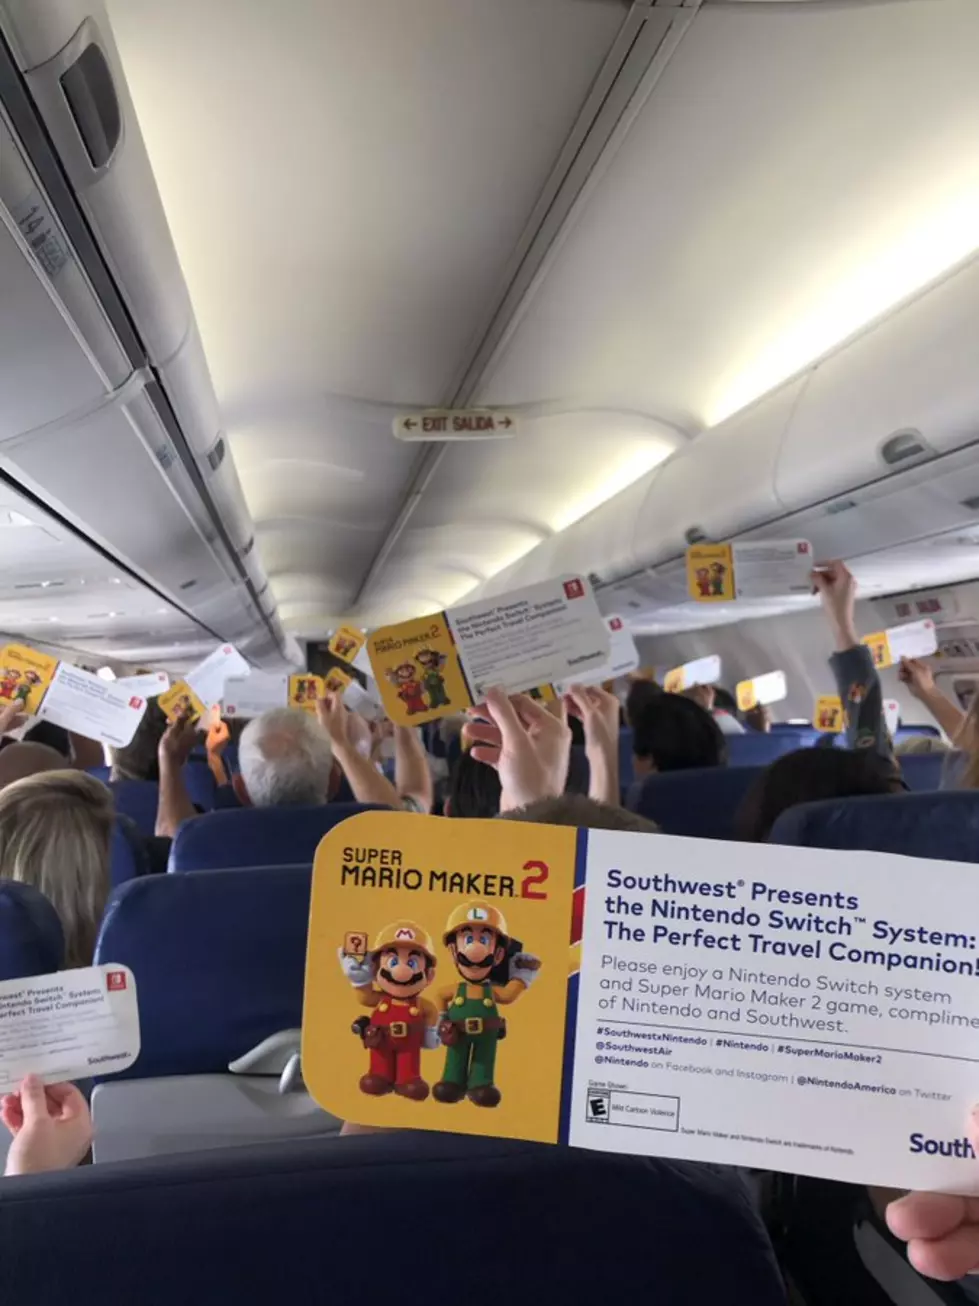 Passengers Leaving Texas Were All Gifted a Nintendo Switch on a Recent Flight